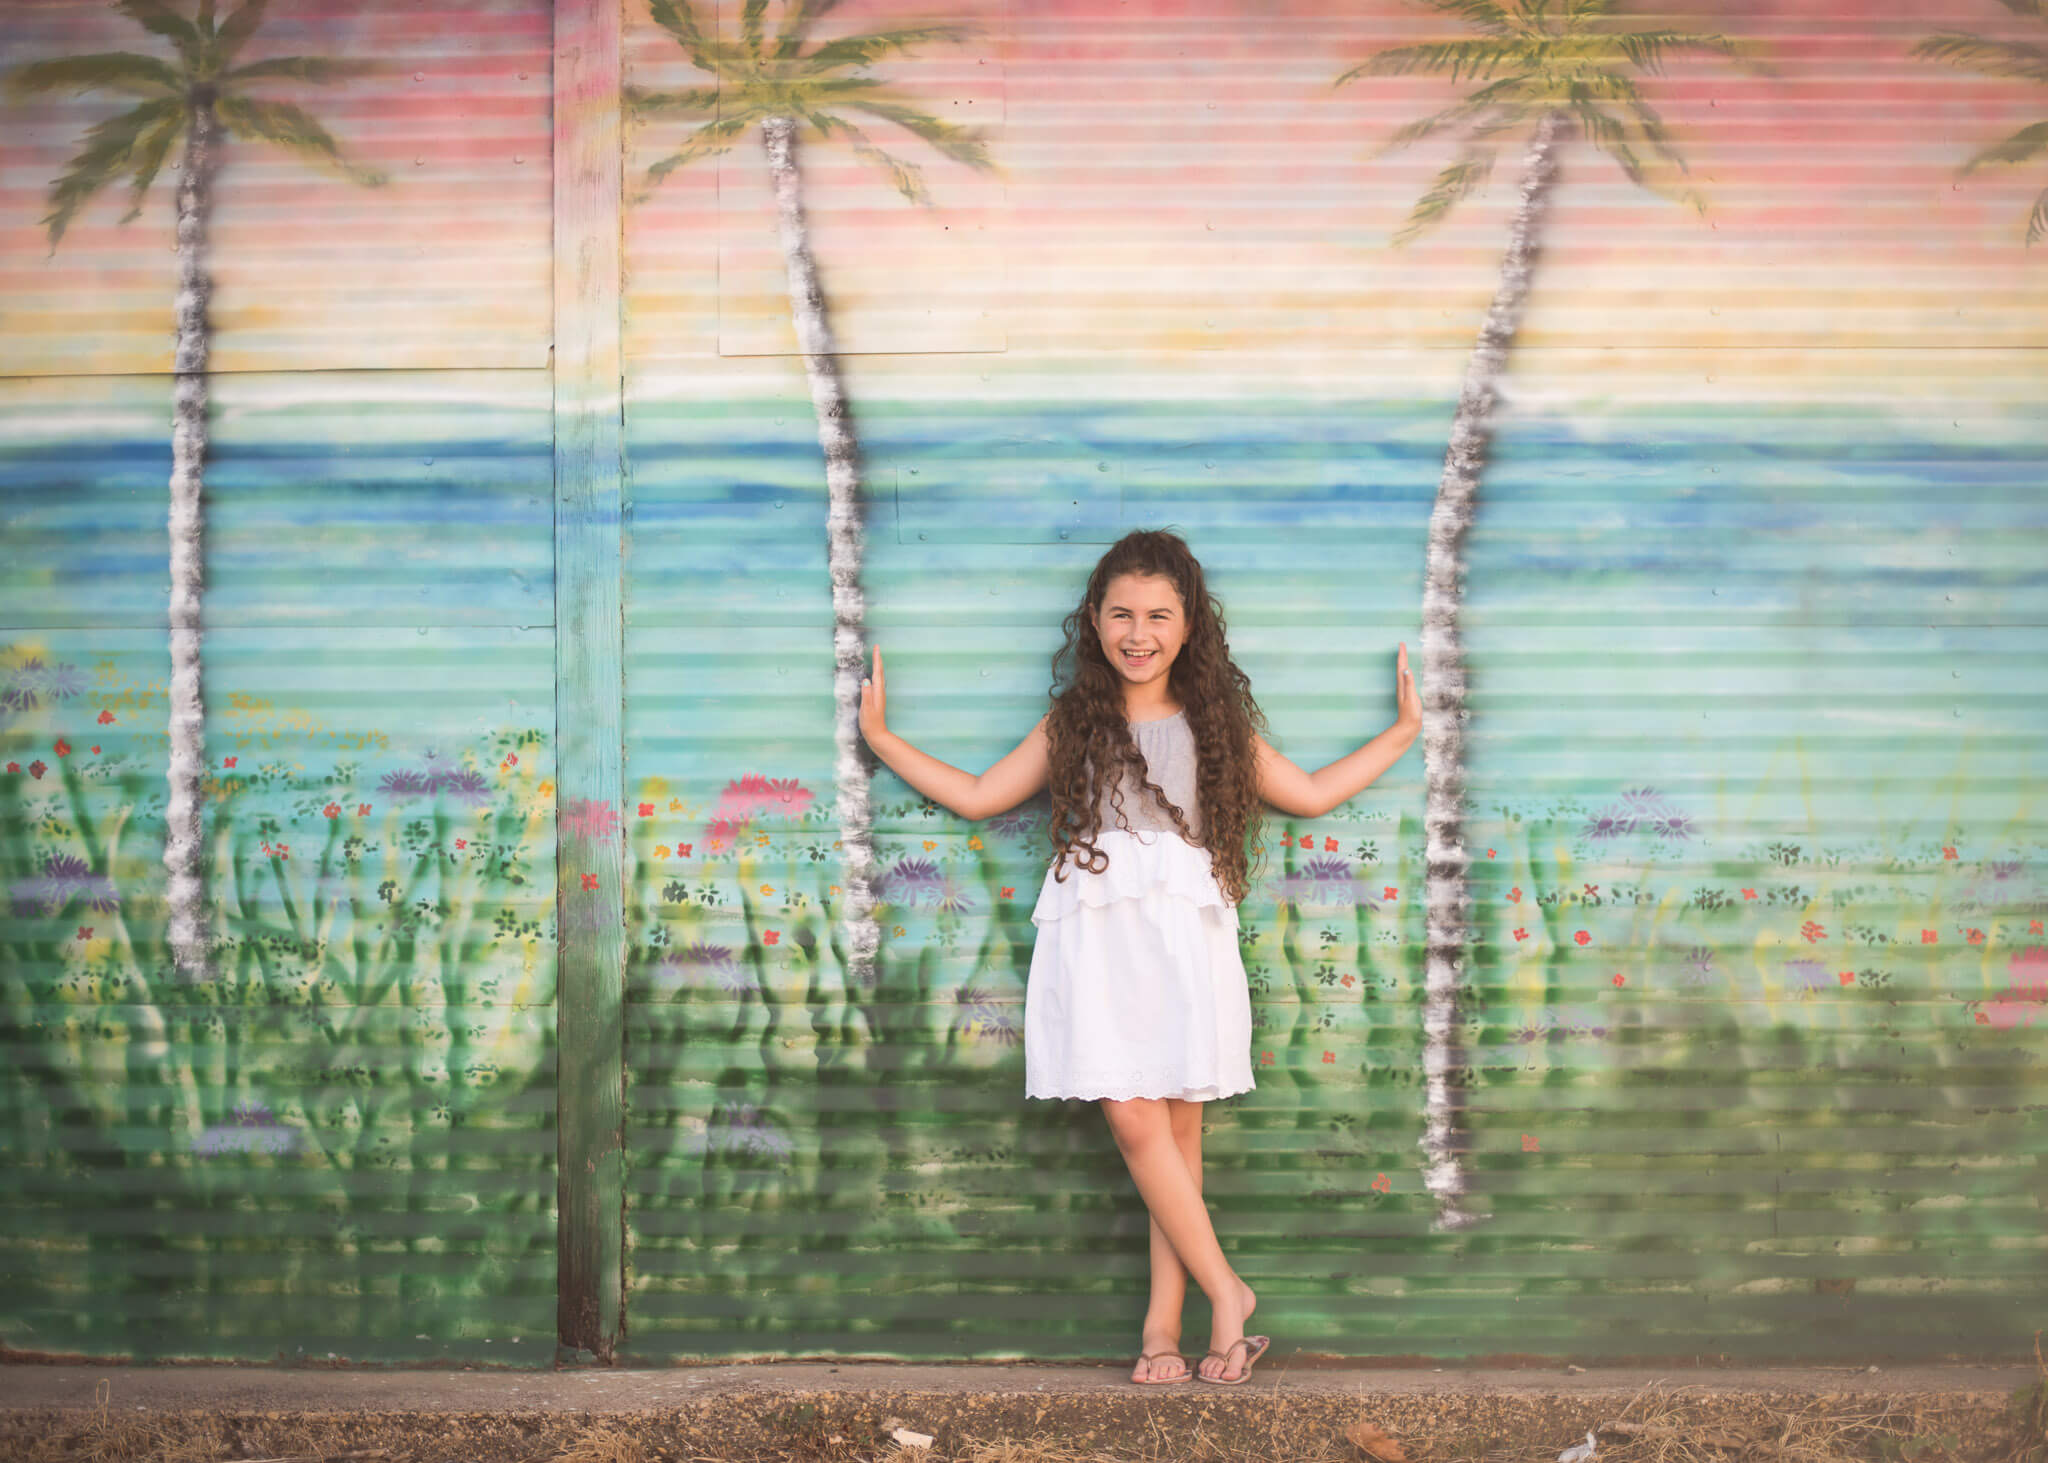 Downtown McKinney mural of palm trees with a young girl seemingly holding them up